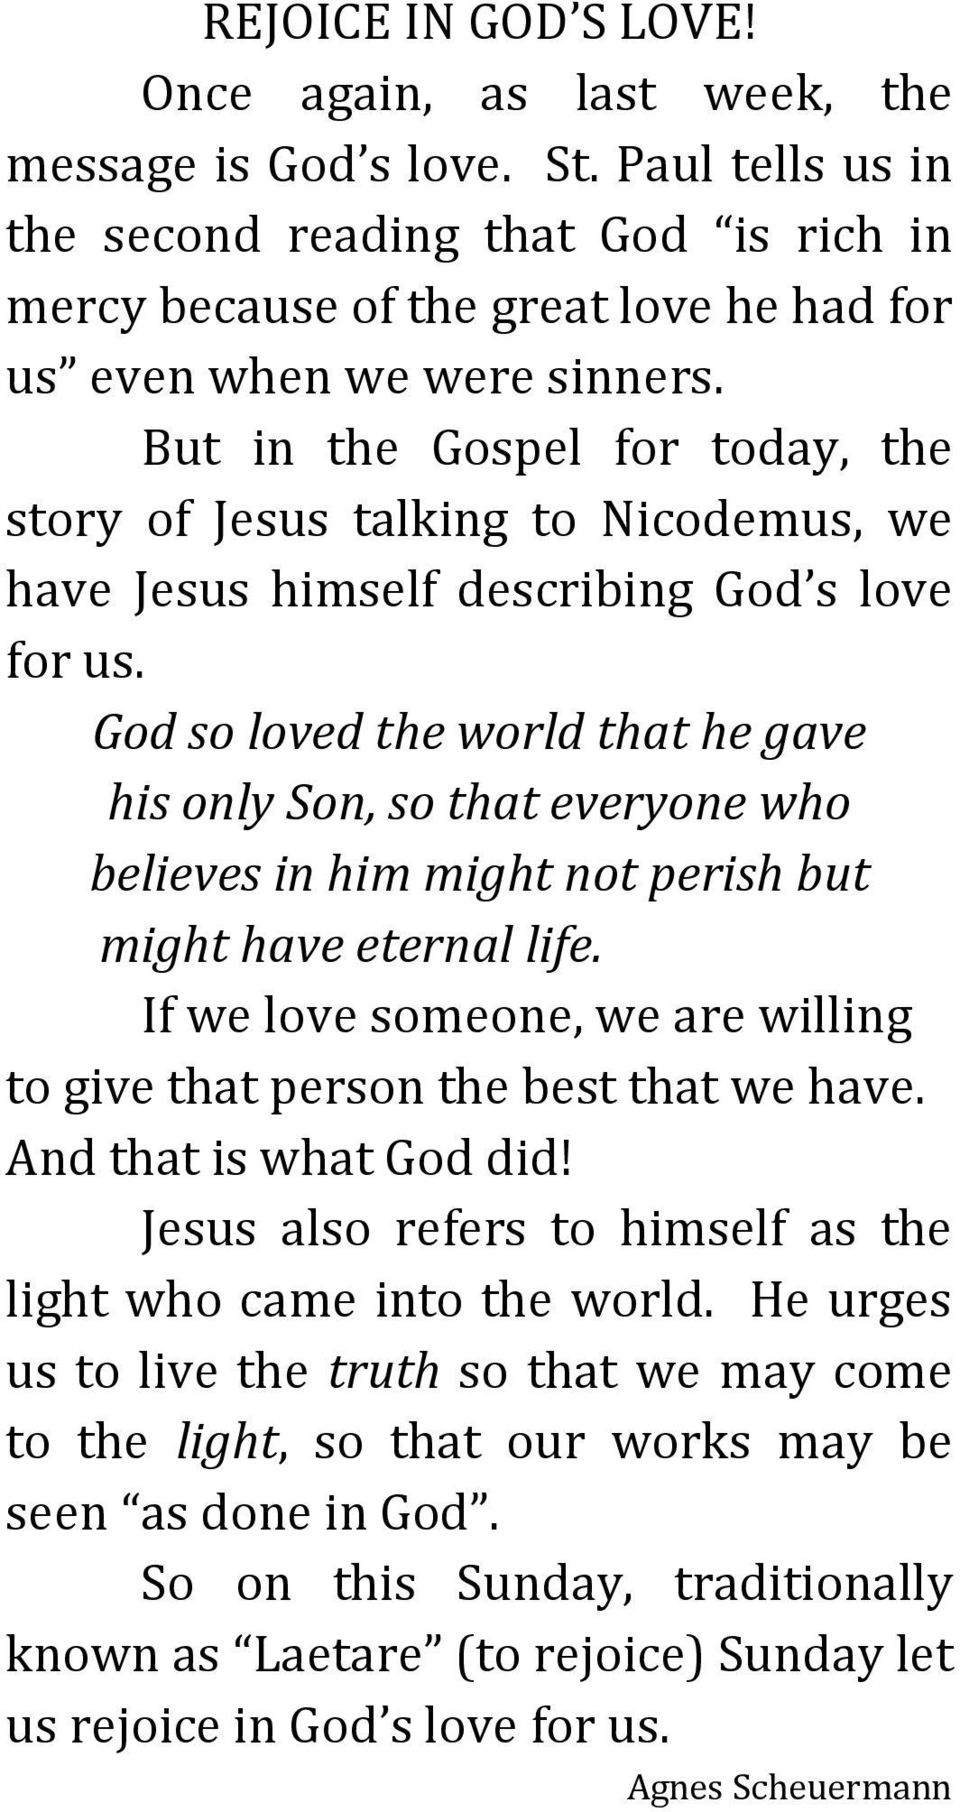 But in the Gospel for today, the story of Jesus talking to Nicodemus, we have Jesus himself describing God s love for us.